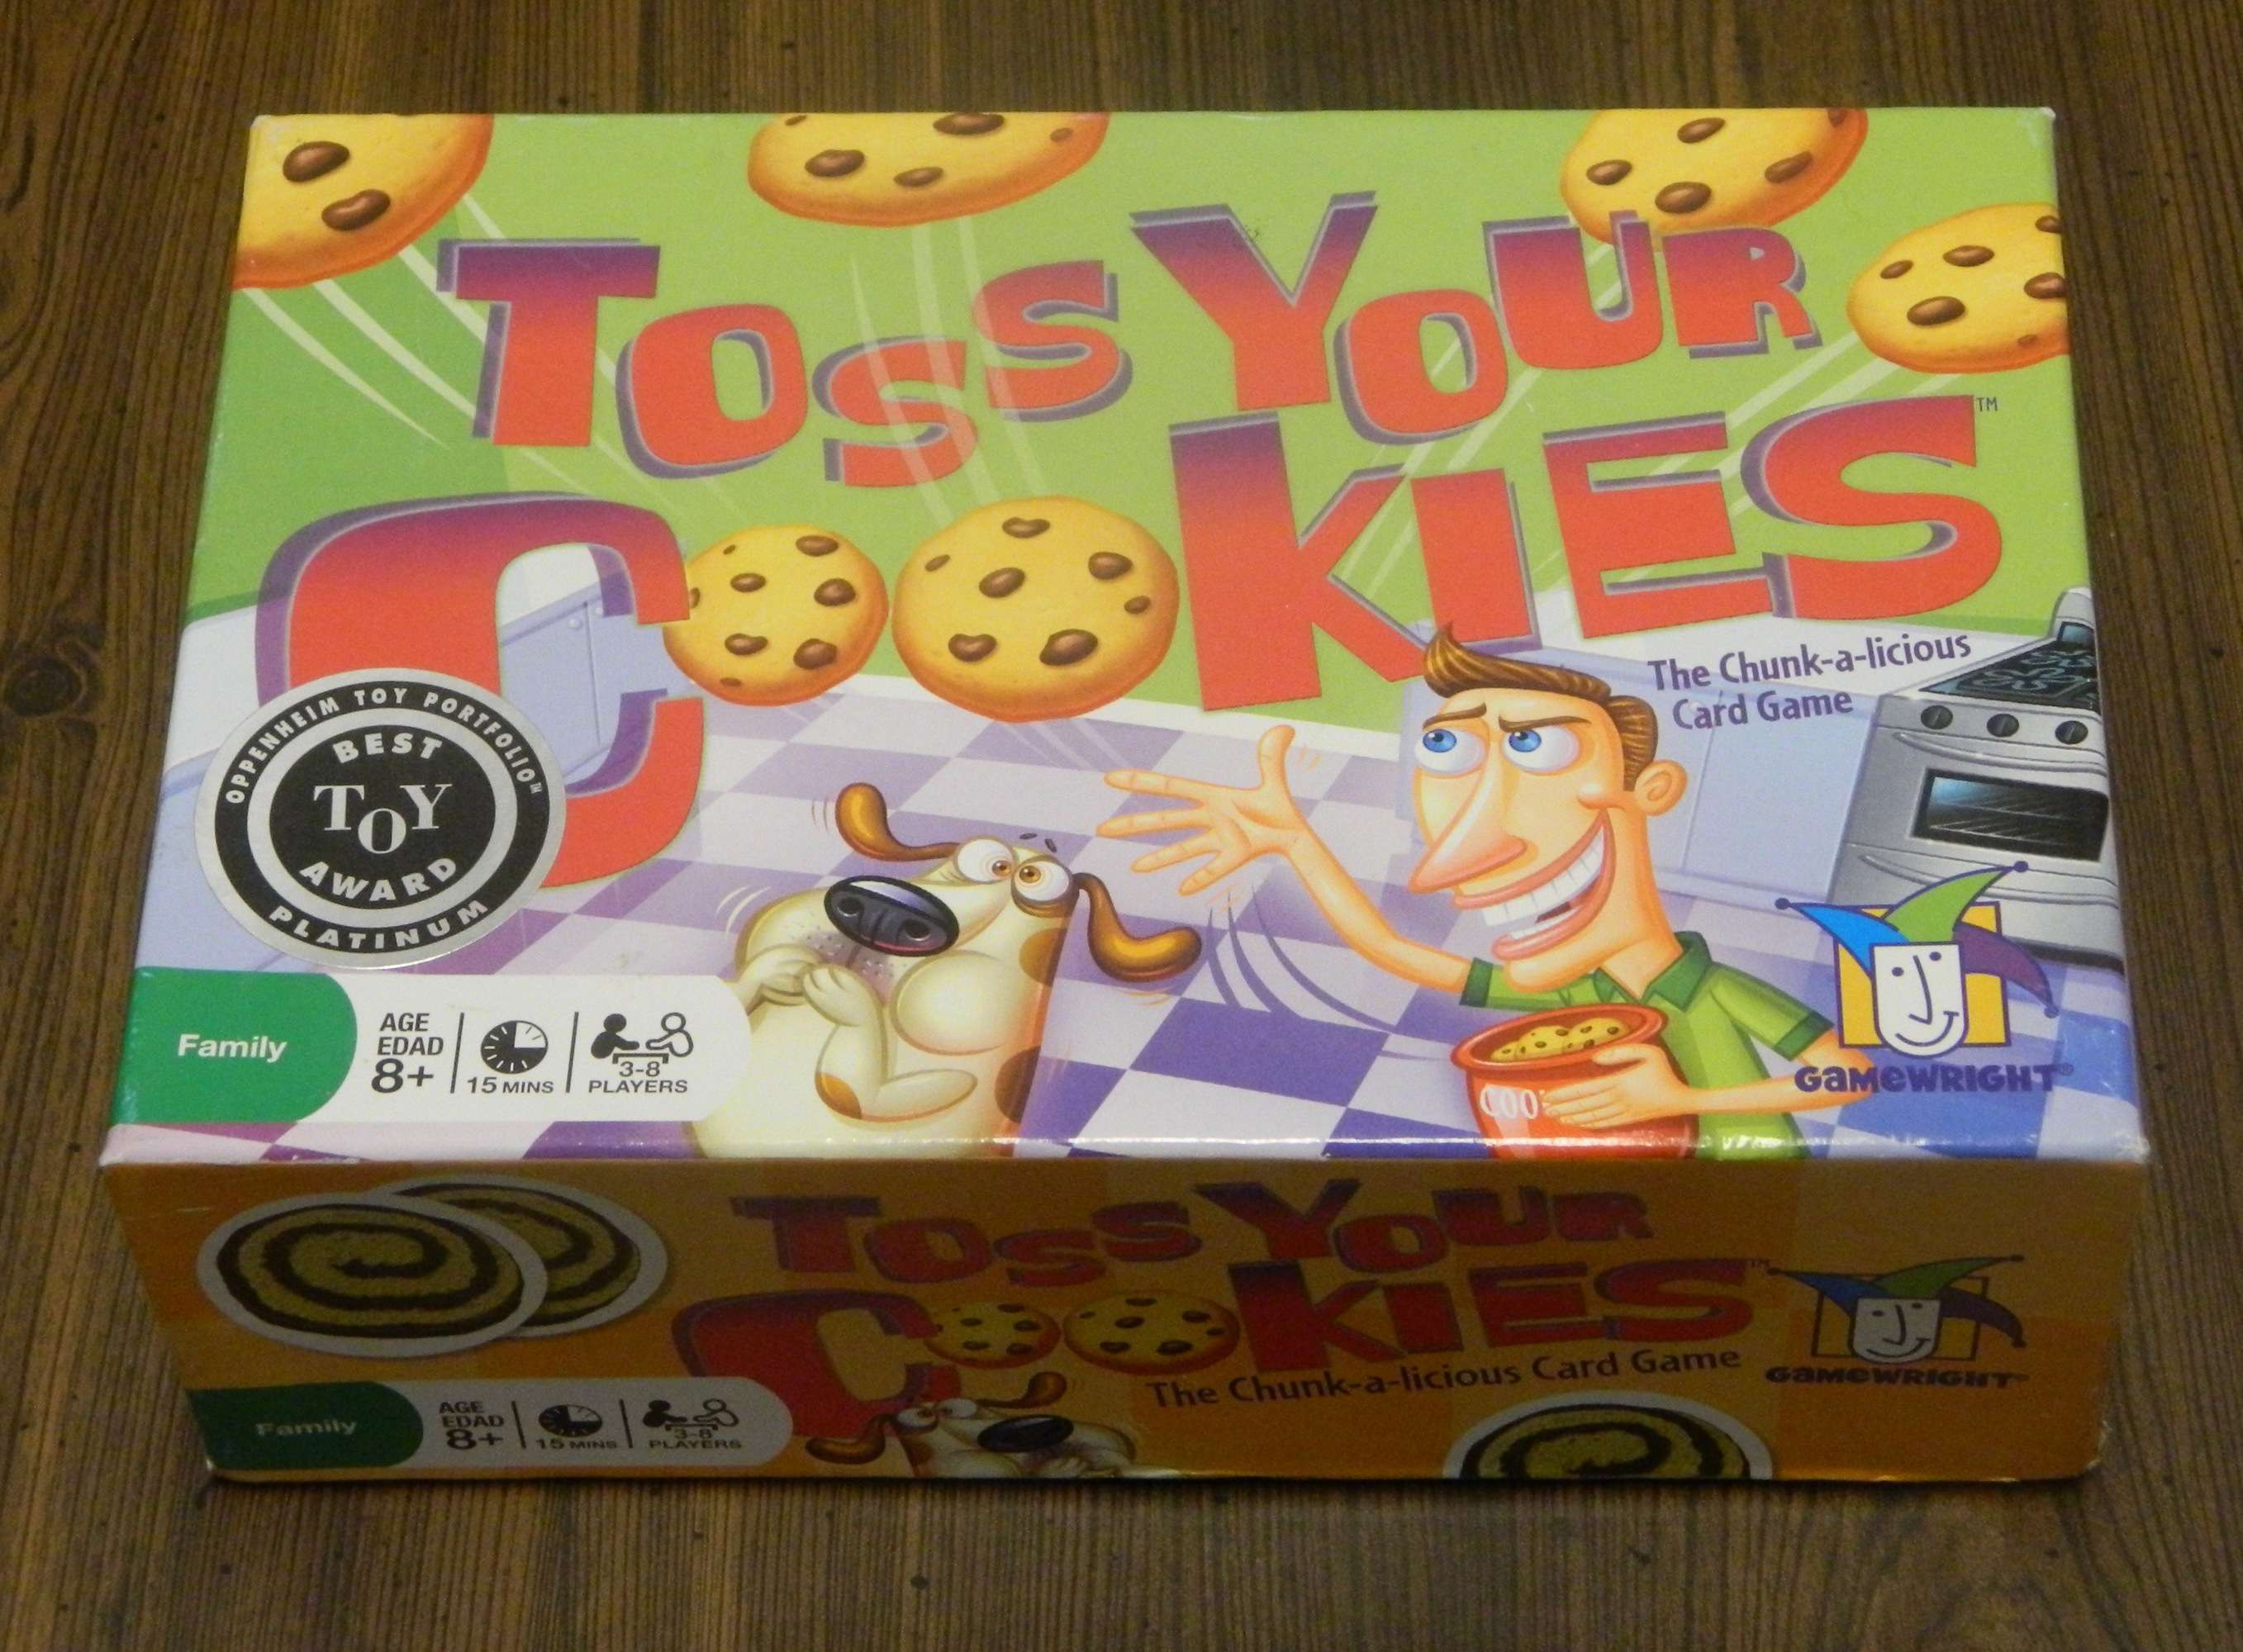 Toss Your Cookies Card Game Review